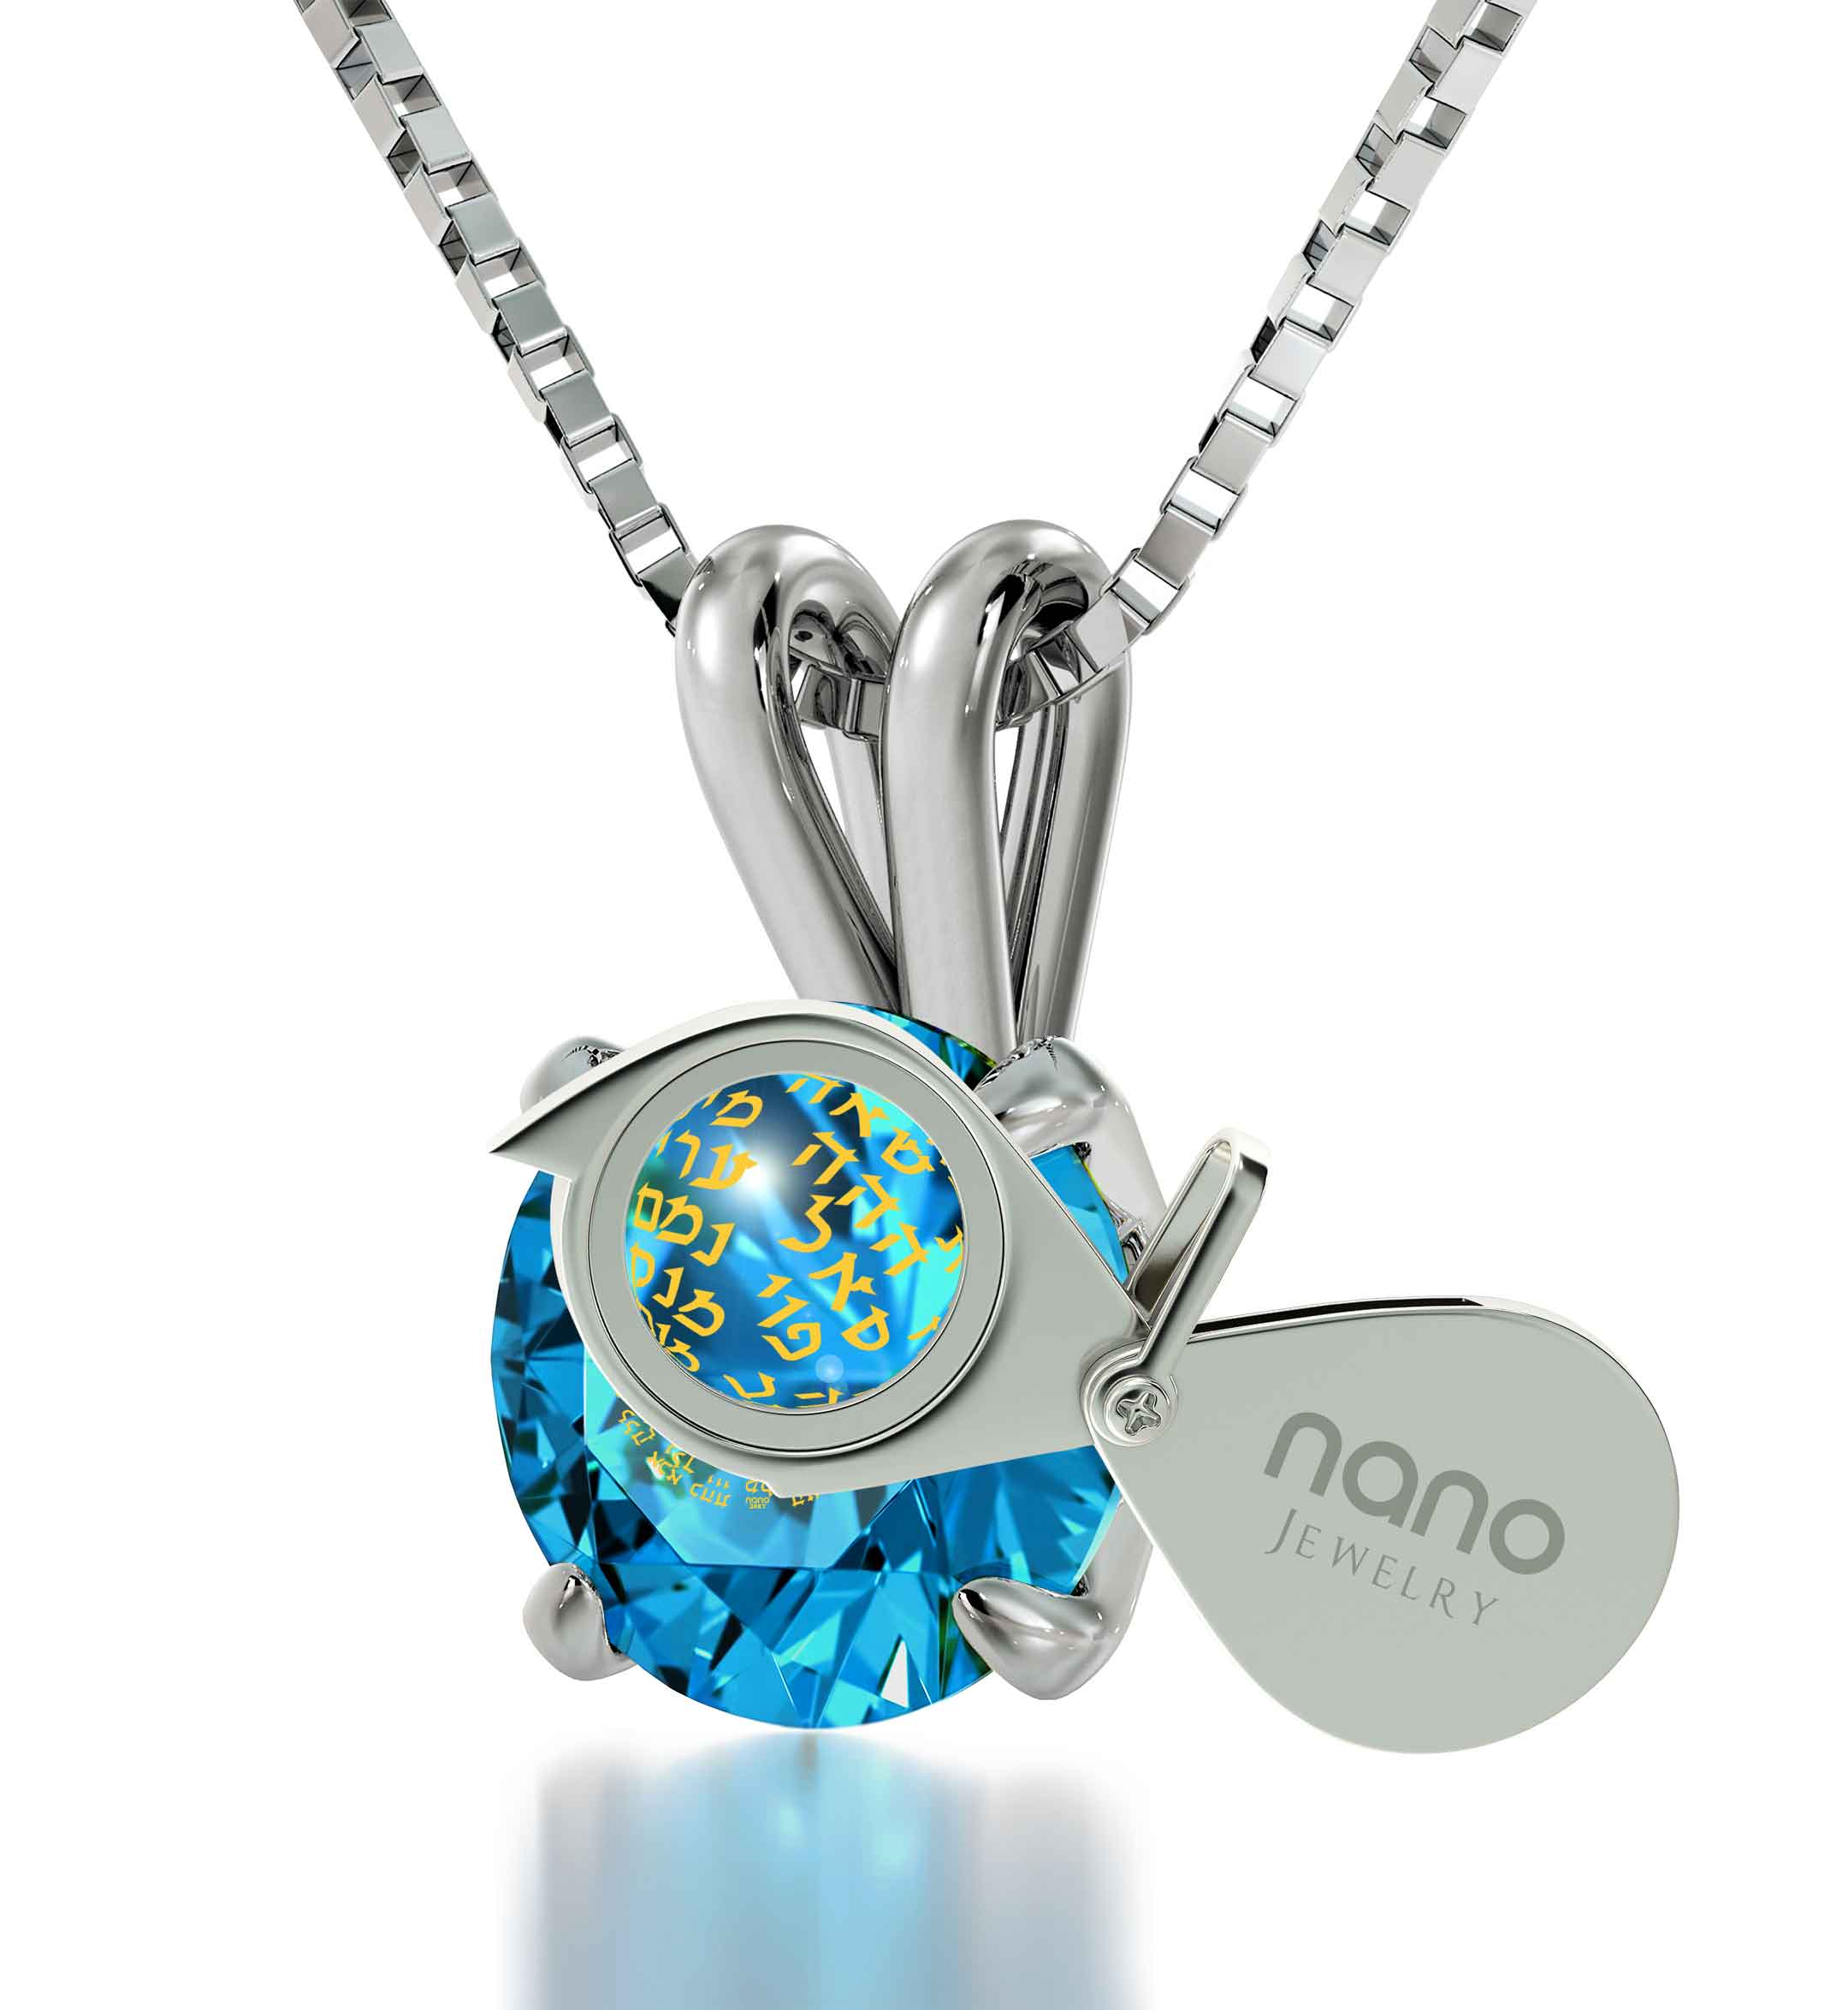 A large blue Swarovski crystal held by a 925 sterling silver claw setting, with intricate golden Hebrew script visible inside the 925 Sterling Silver Kabballah Necklace 72 Names Solitaire Pendant 24k Gold Inscribed.